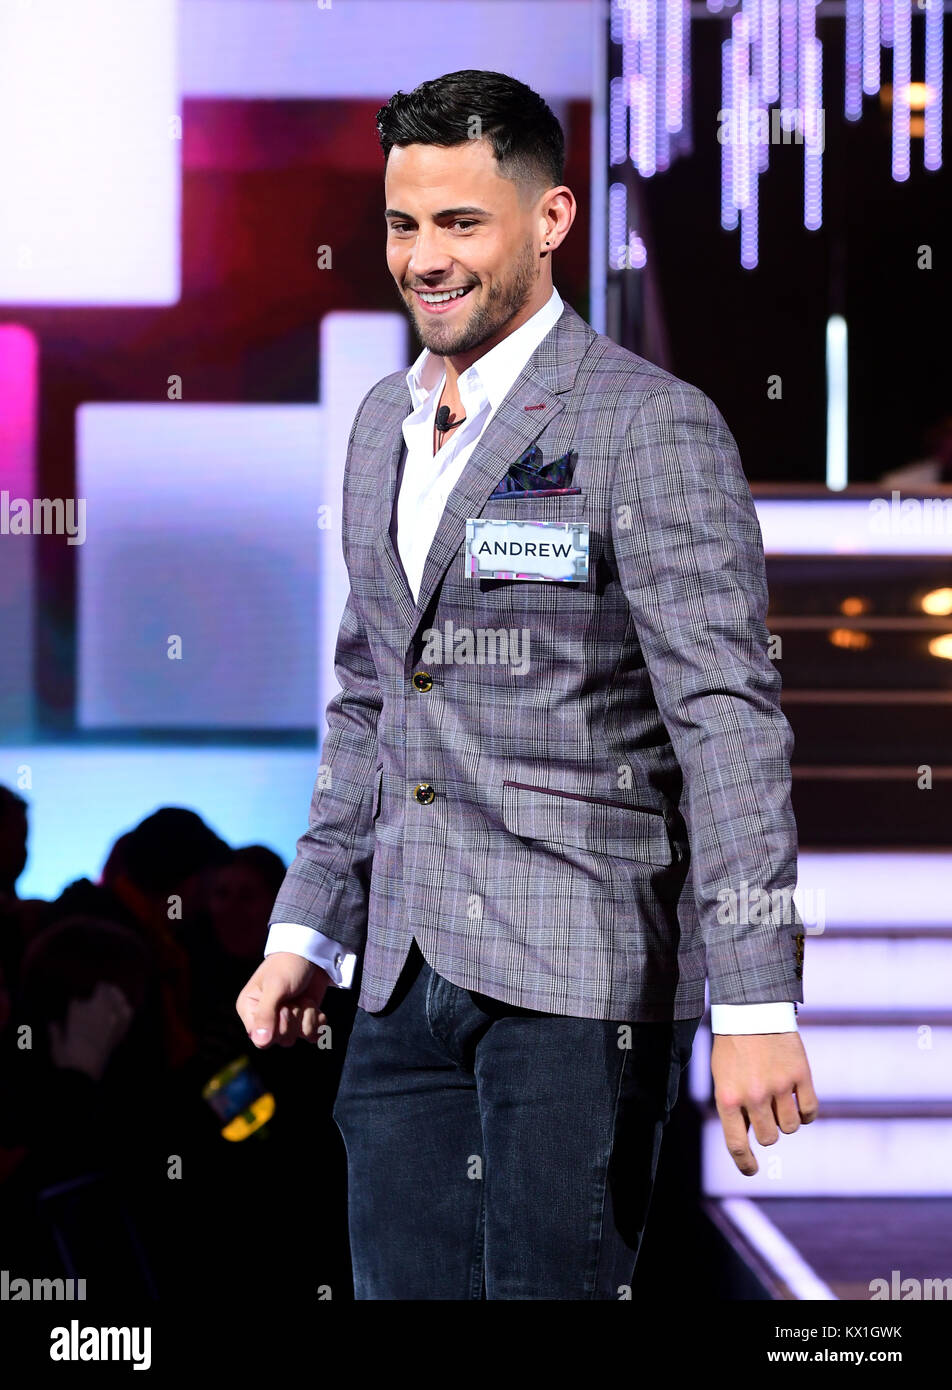 London, UK. 05th Jan, 2018. Andrew Brady enters the house during the Celebrity Big Brother Men's Launch held at Elstree Studios in Borehamwood, Hertfordshire. PRESS ASSOCIATION Photo. Picture date: Friday January 5, 2018. See PA story SHOWBIZ CBB Housemates. Photo credit should read: Ian West/PA Wire Credit: Gtres Información más Comuniación on line, S.L./Alamy Live News Stock Photo